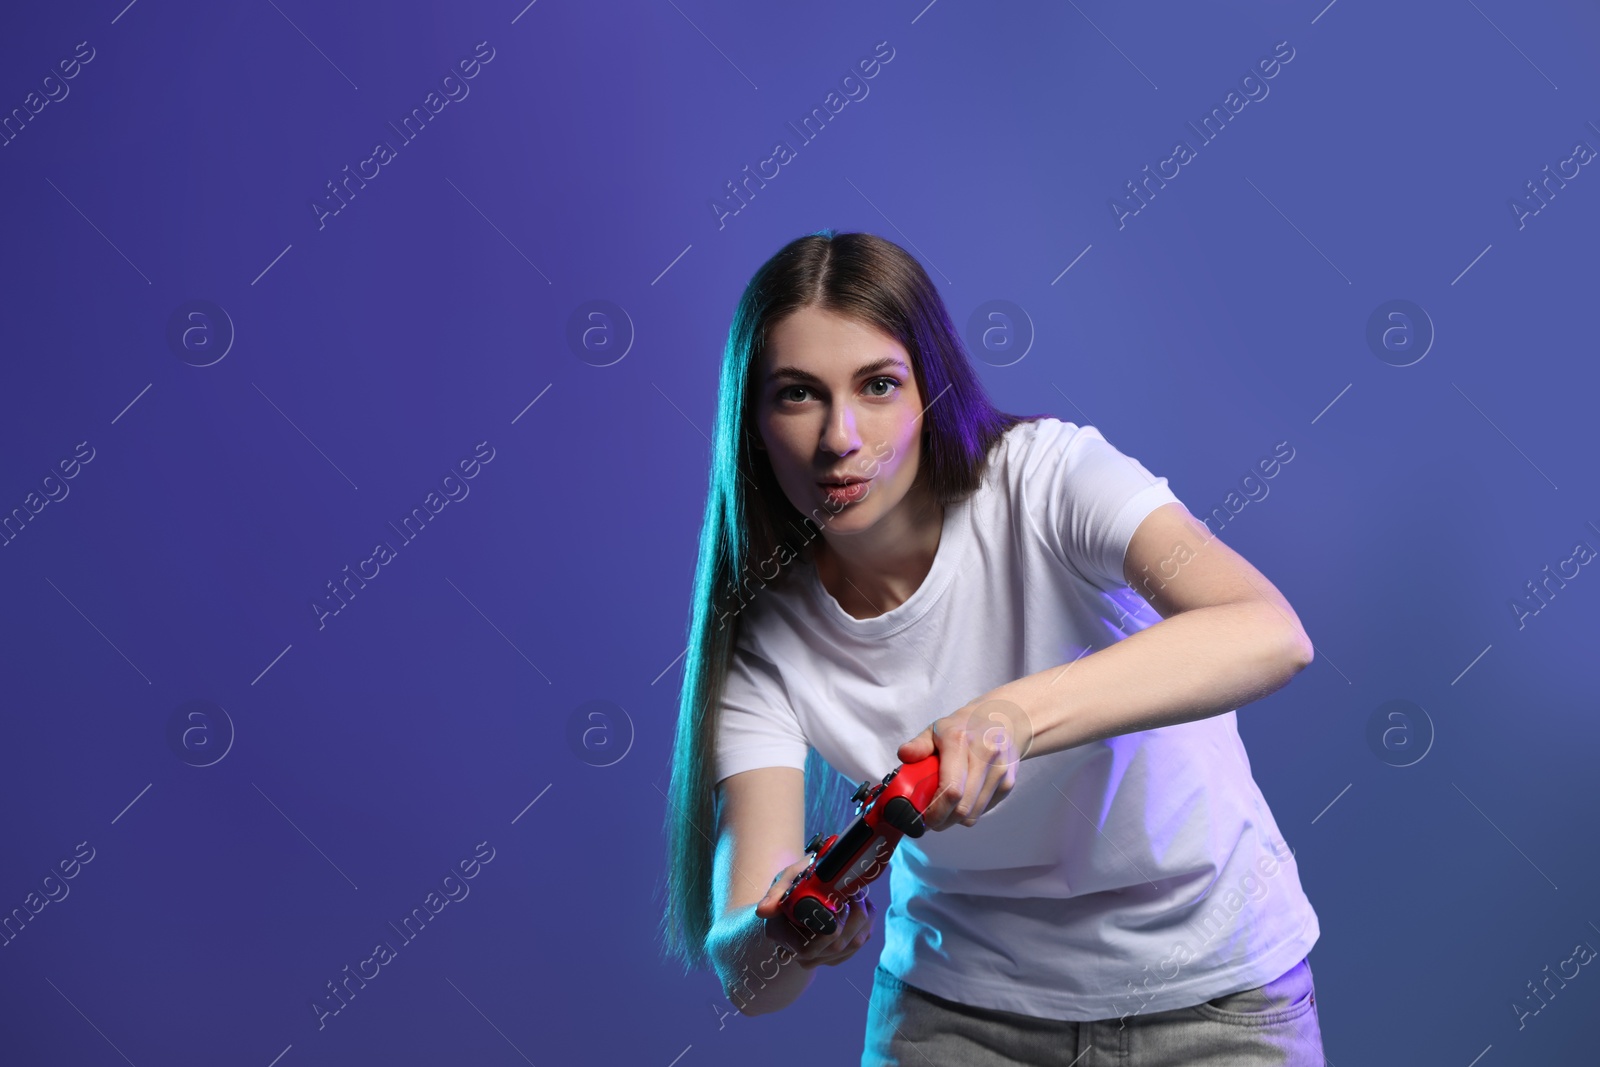 Photo of Surprised woman playing video games with controller on violet background, space for text